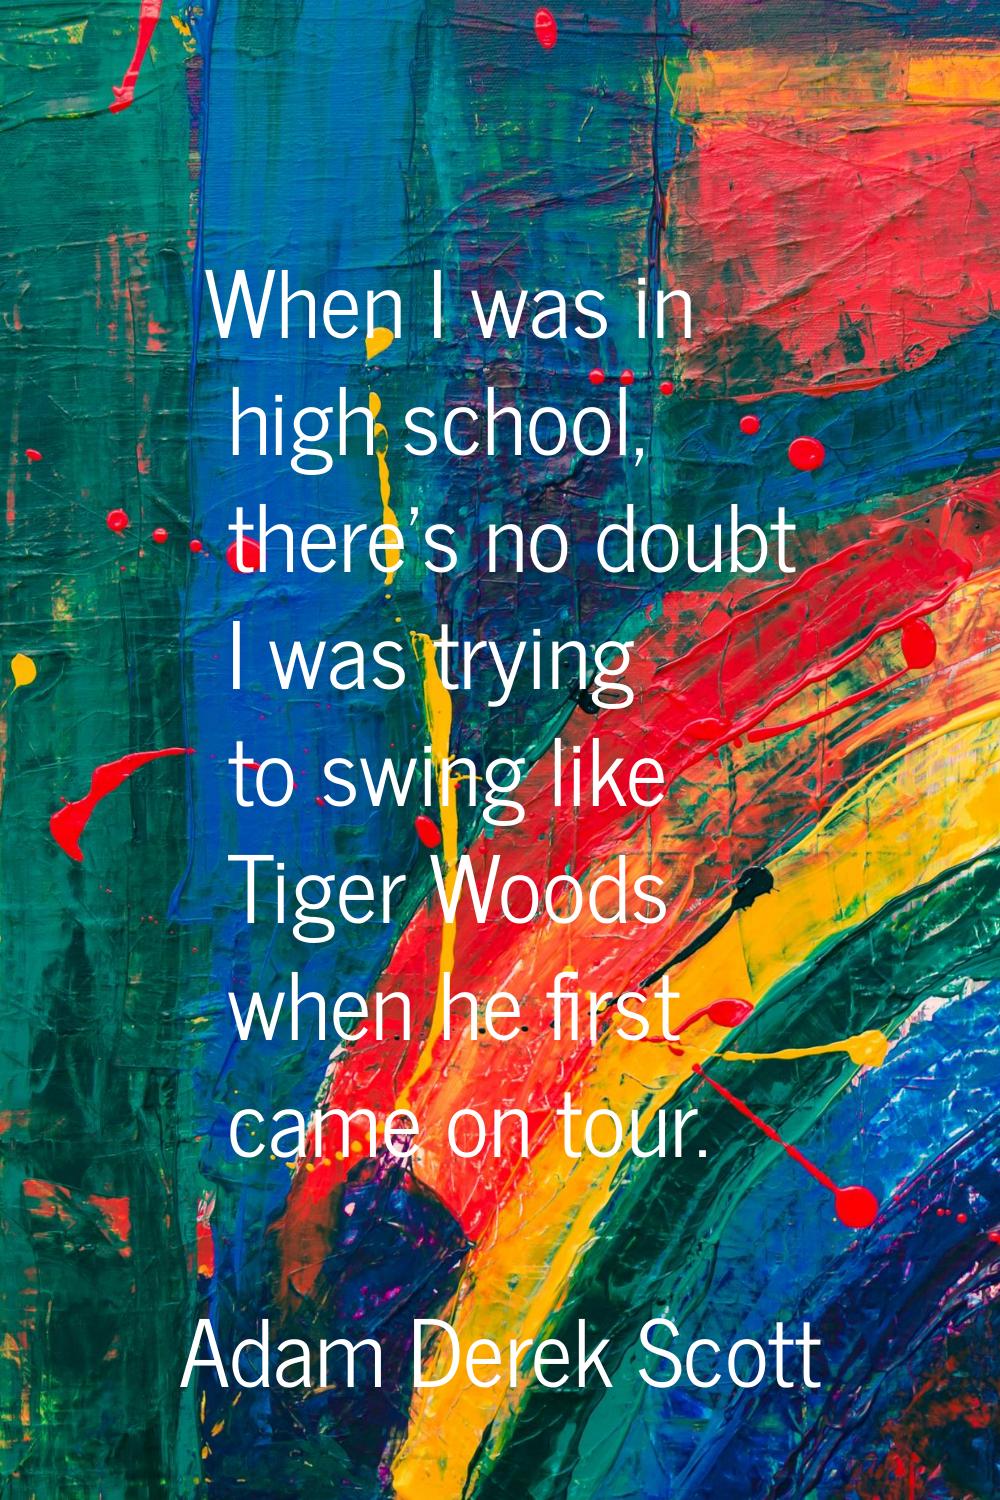 When I was in high school, there's no doubt I was trying to swing like Tiger Woods when he first ca